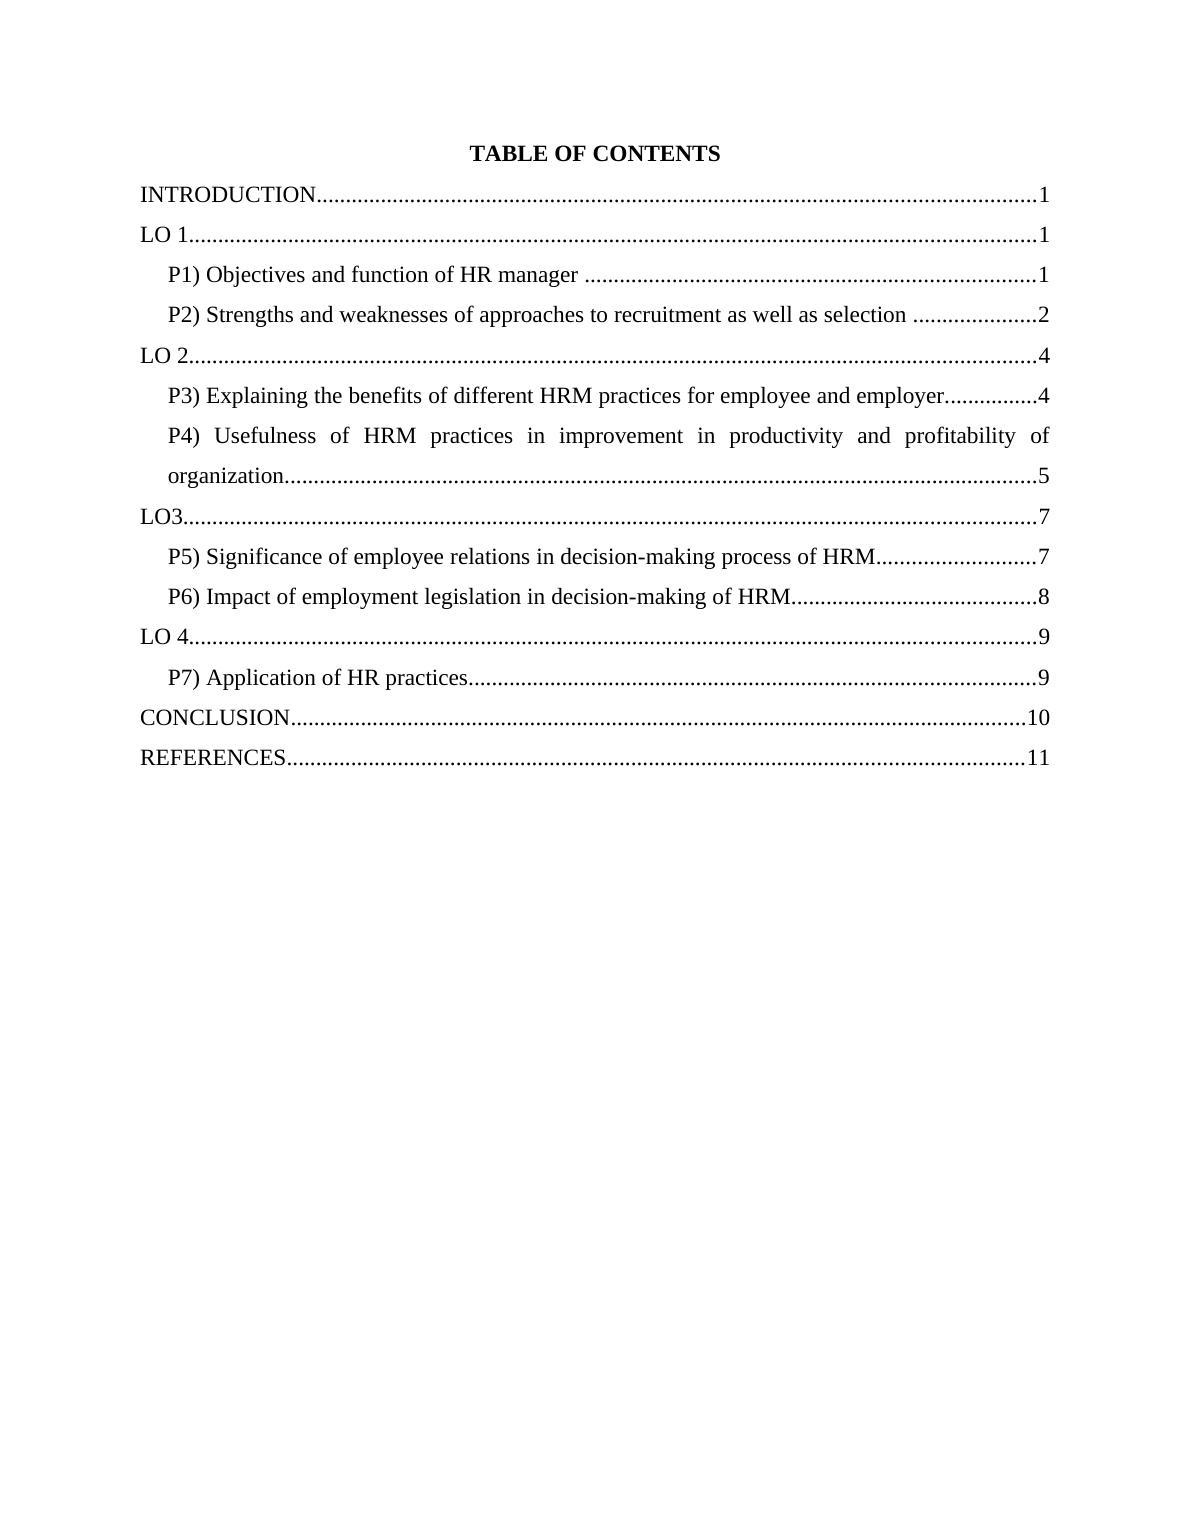 HUMAN RESOURCE MANAGEMENT TABLE OF CONTENTS_2